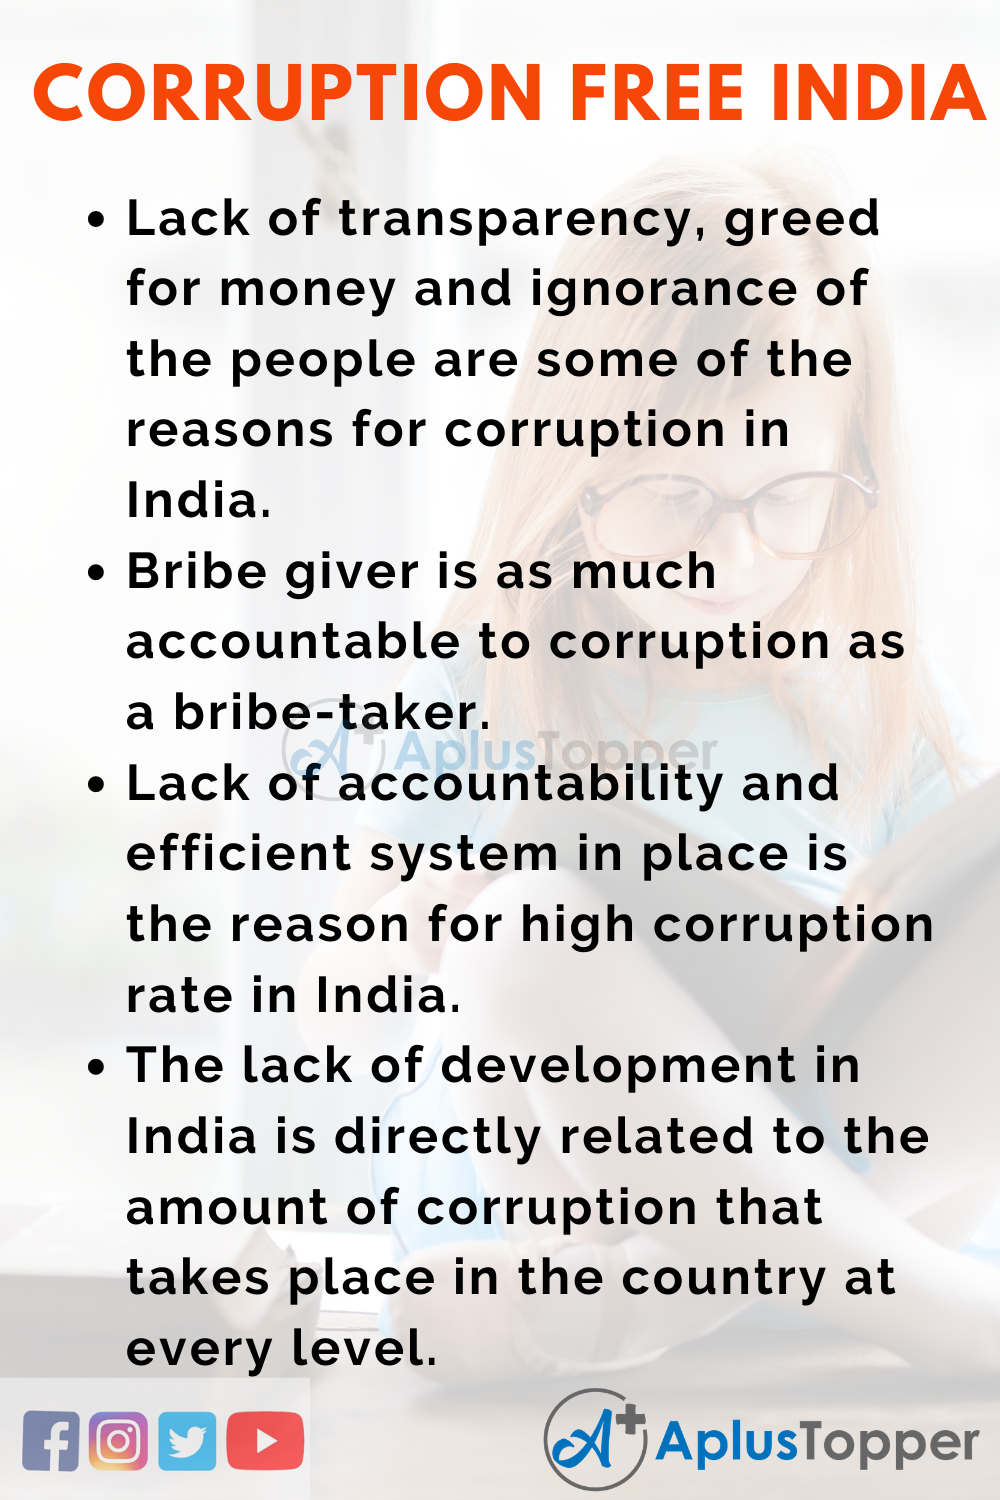 an essay on corruption free india